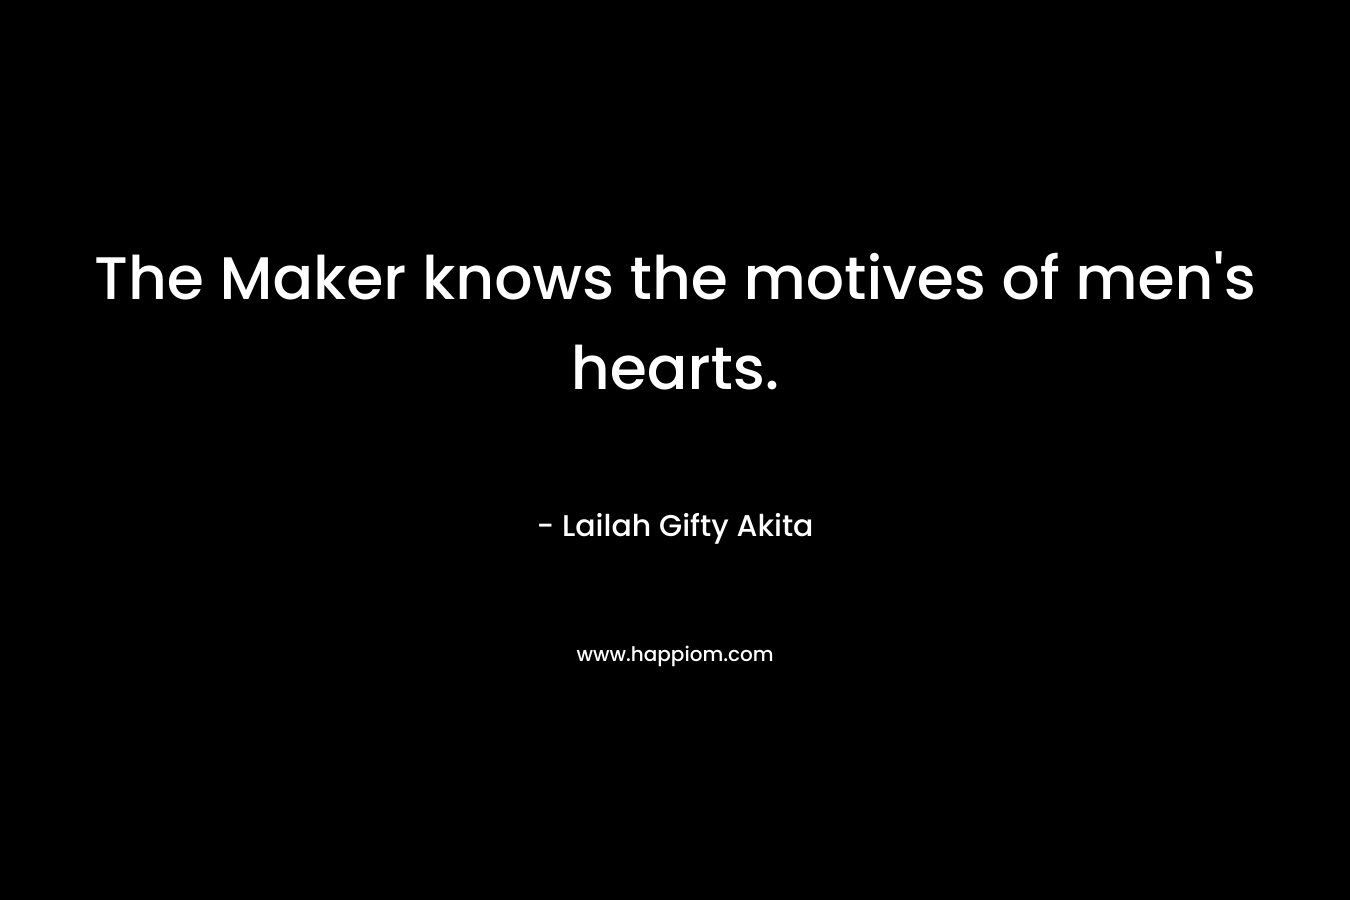 The Maker knows the motives of men's hearts.